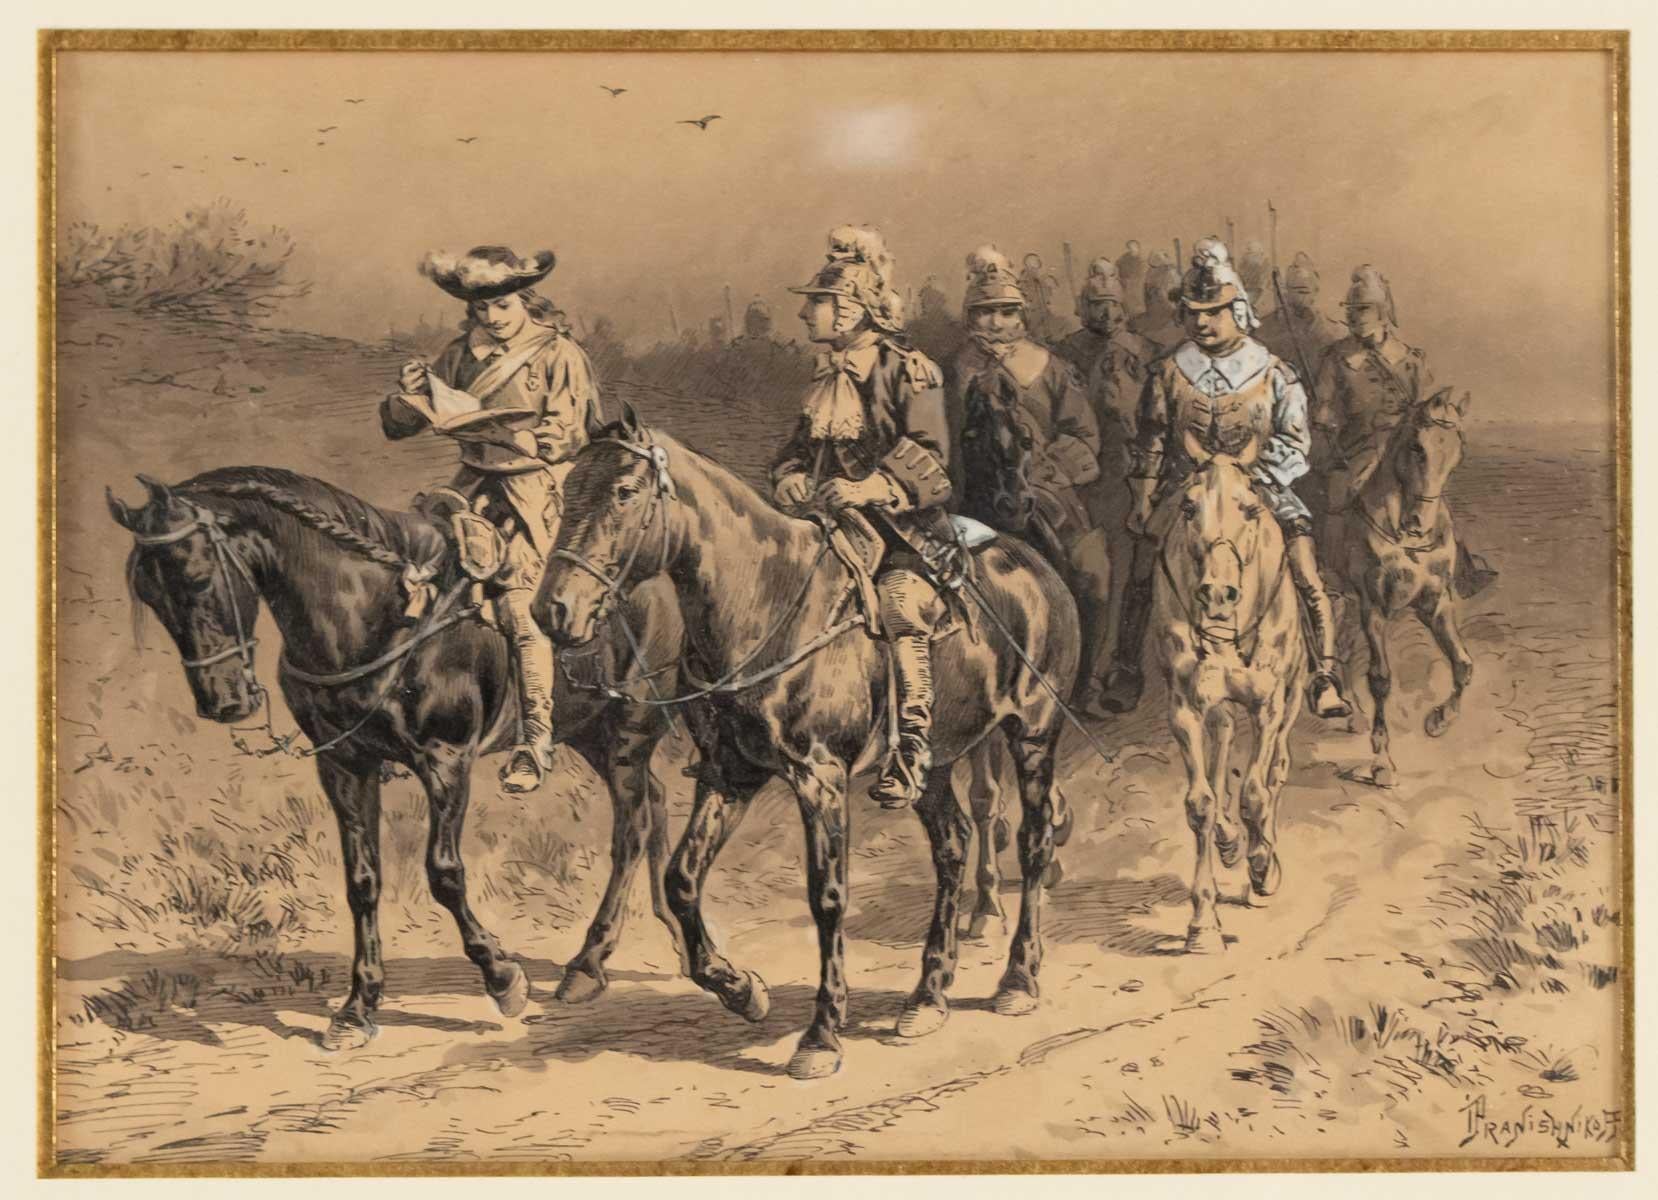 Drawing from the late 19th century from Pranishnikoff representative horsemen
Drawing: H12cm, W 16cm
Frame: H 27.5 L 32cm, P 1cm.